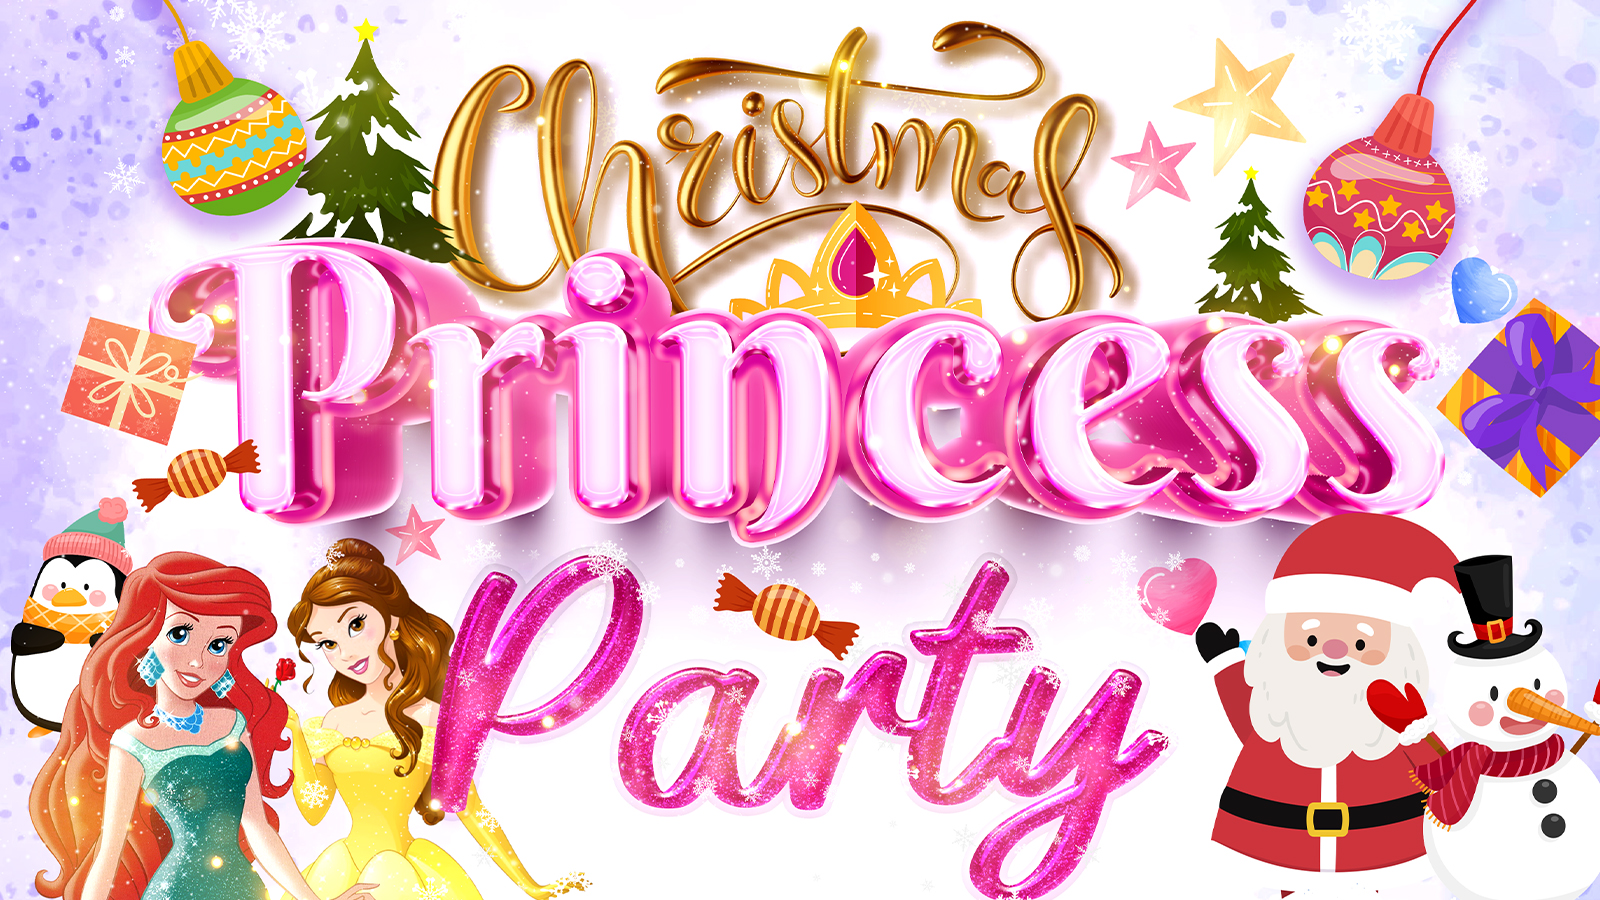 👑 👸🏼 THE CHRISTMAS PRINCESS PARTY at 2.15pm (EXTRA PERFORMANCE) – live sing-a-longs and games 👸🏼 👑  with Ariel and Belle